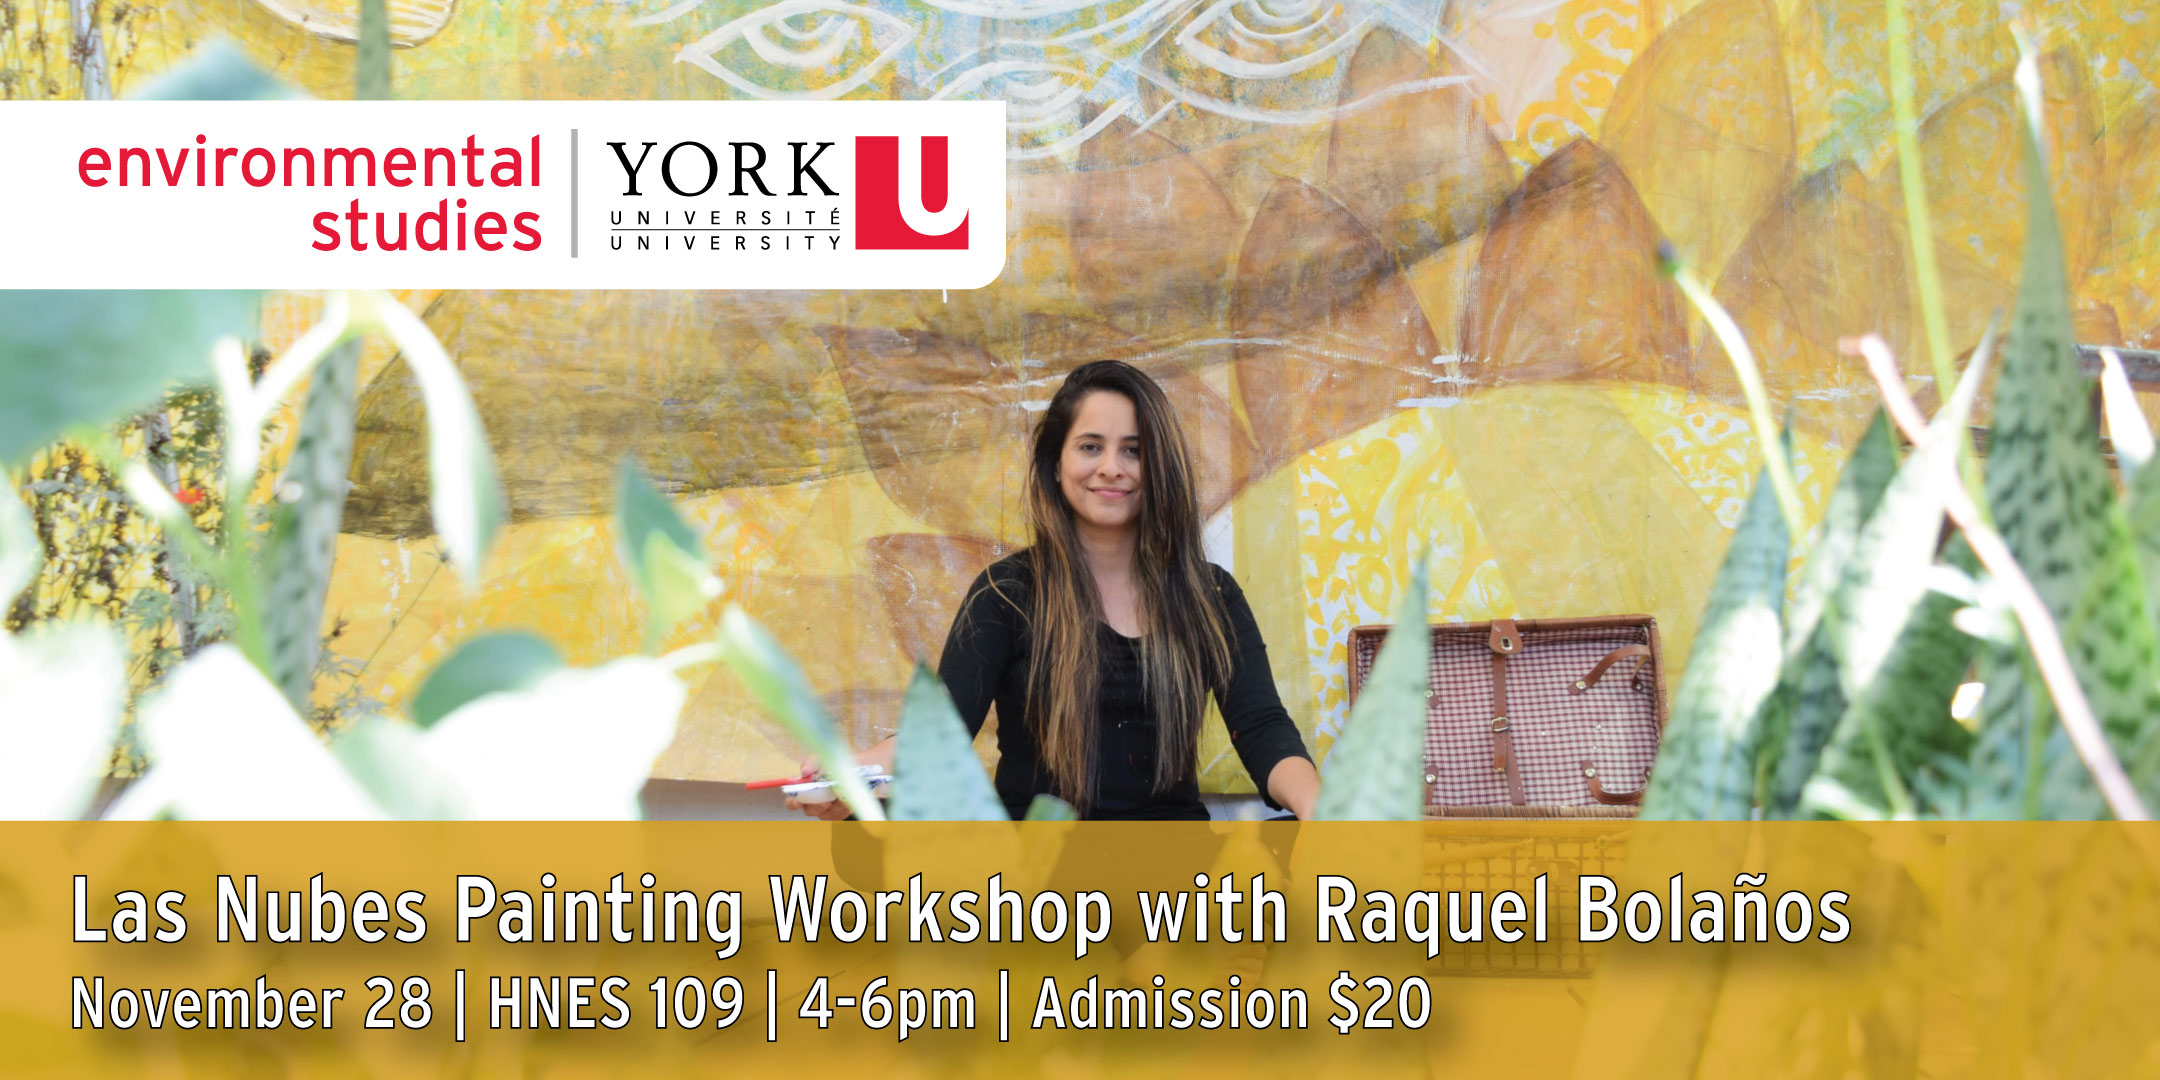 Las Nubes Painting Workshop with Raquel Bolaños November 28 | HNES 109 | 4-6pm | Admission $20